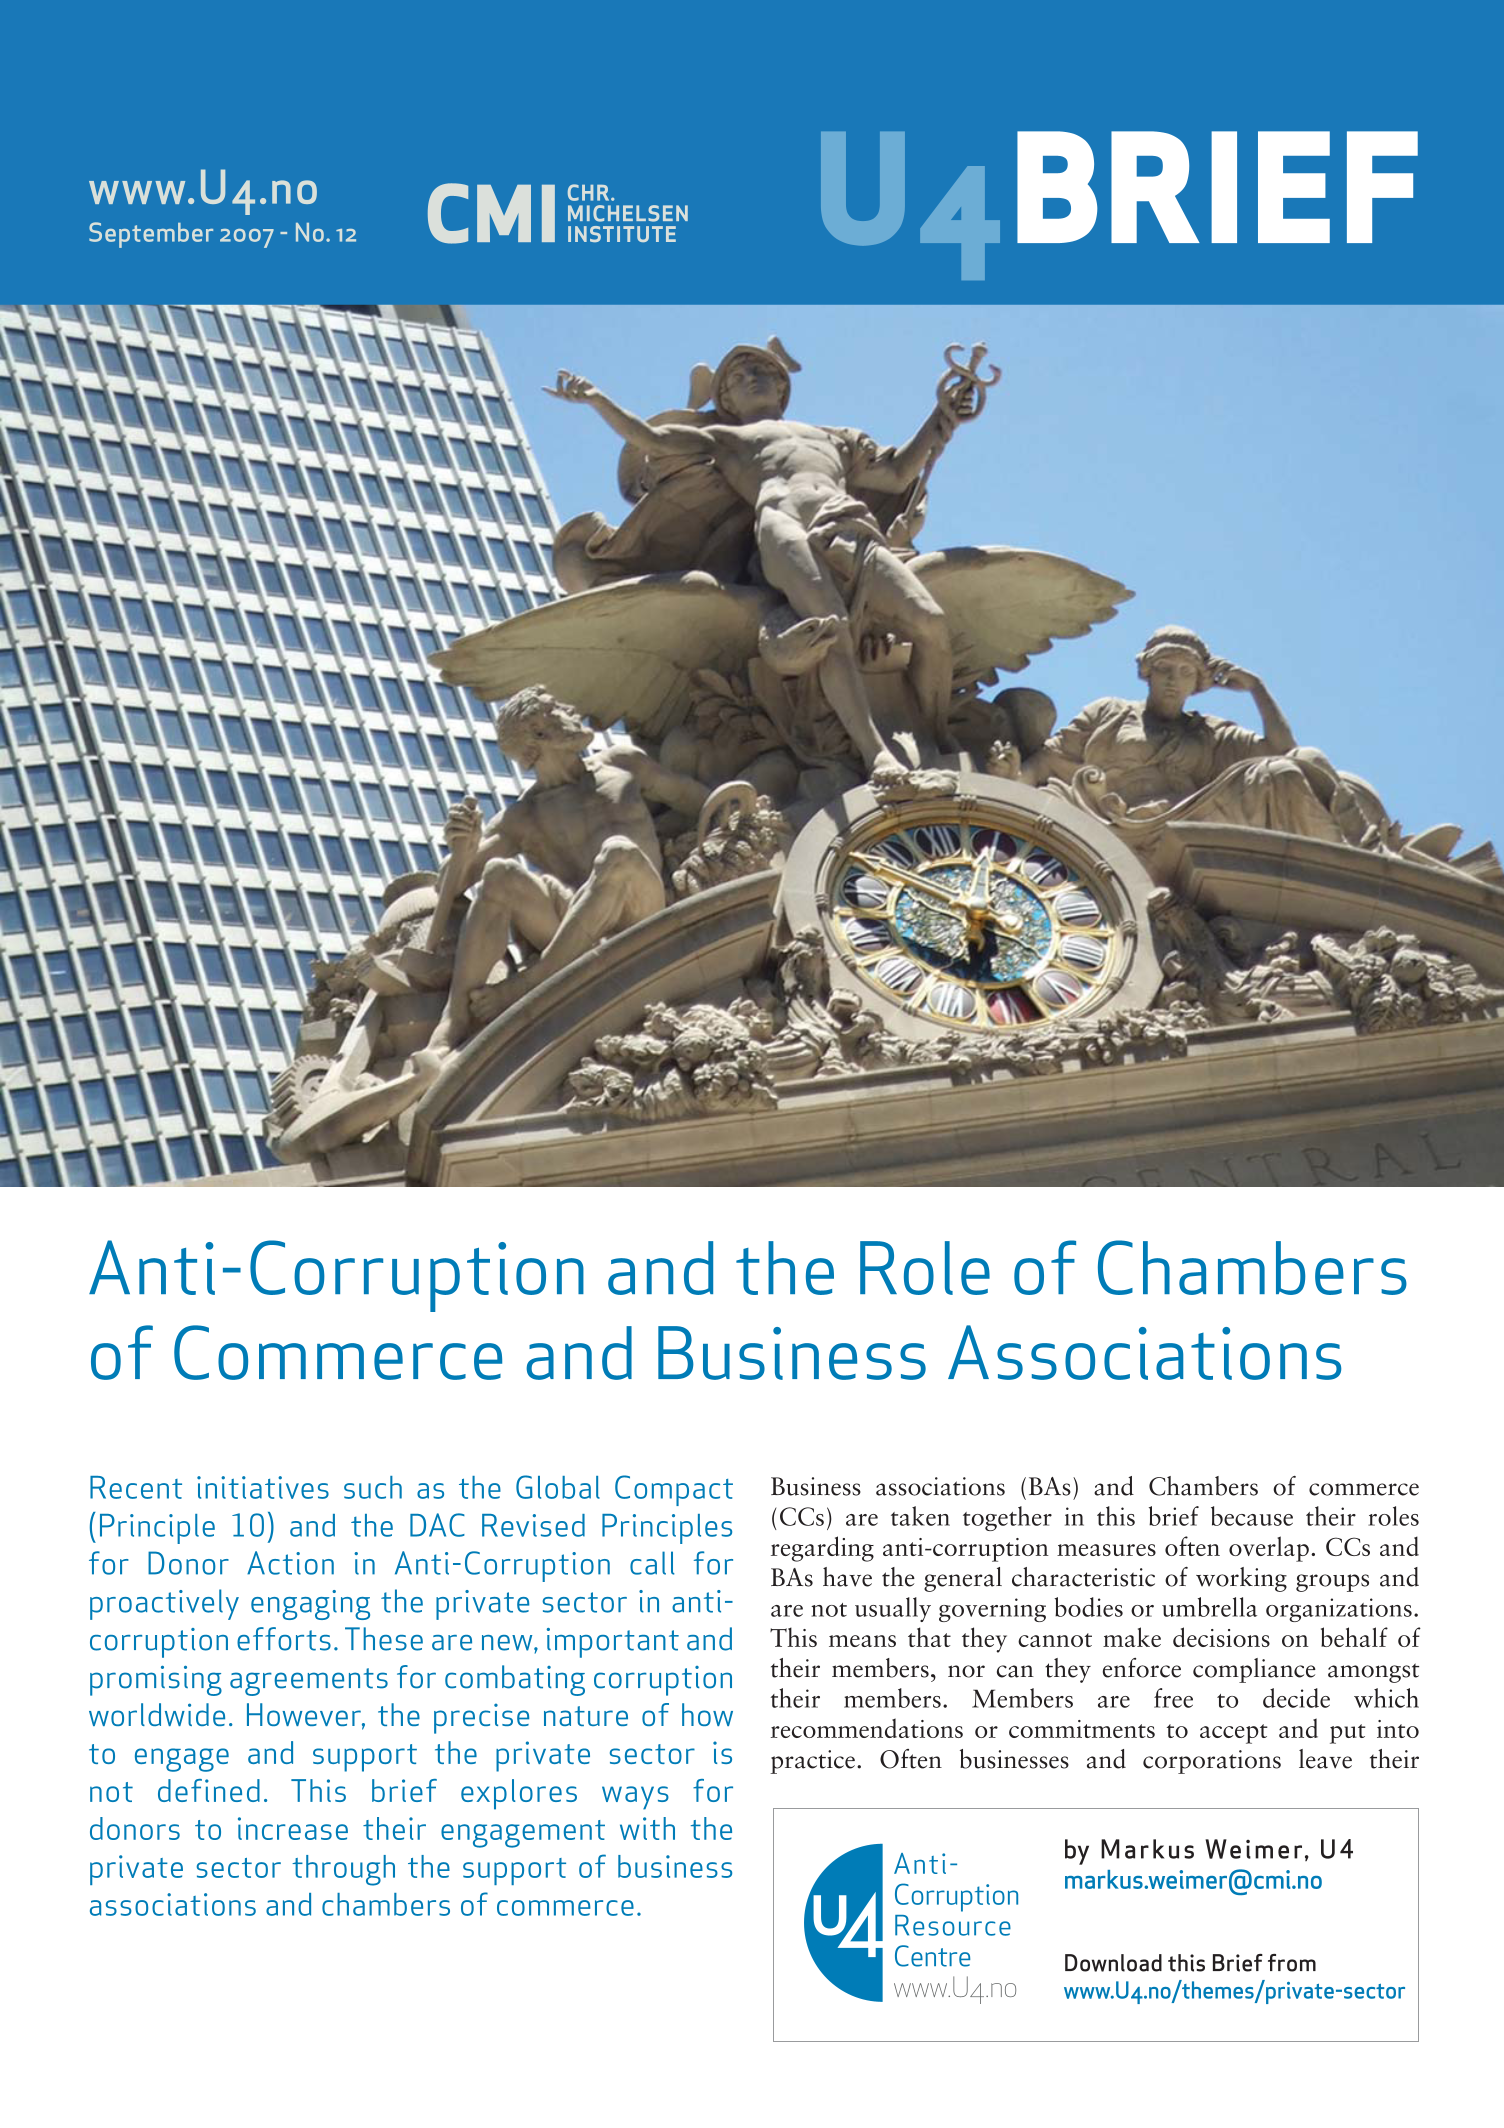 Anti-corruption and the role of chambers of commerce and business associations